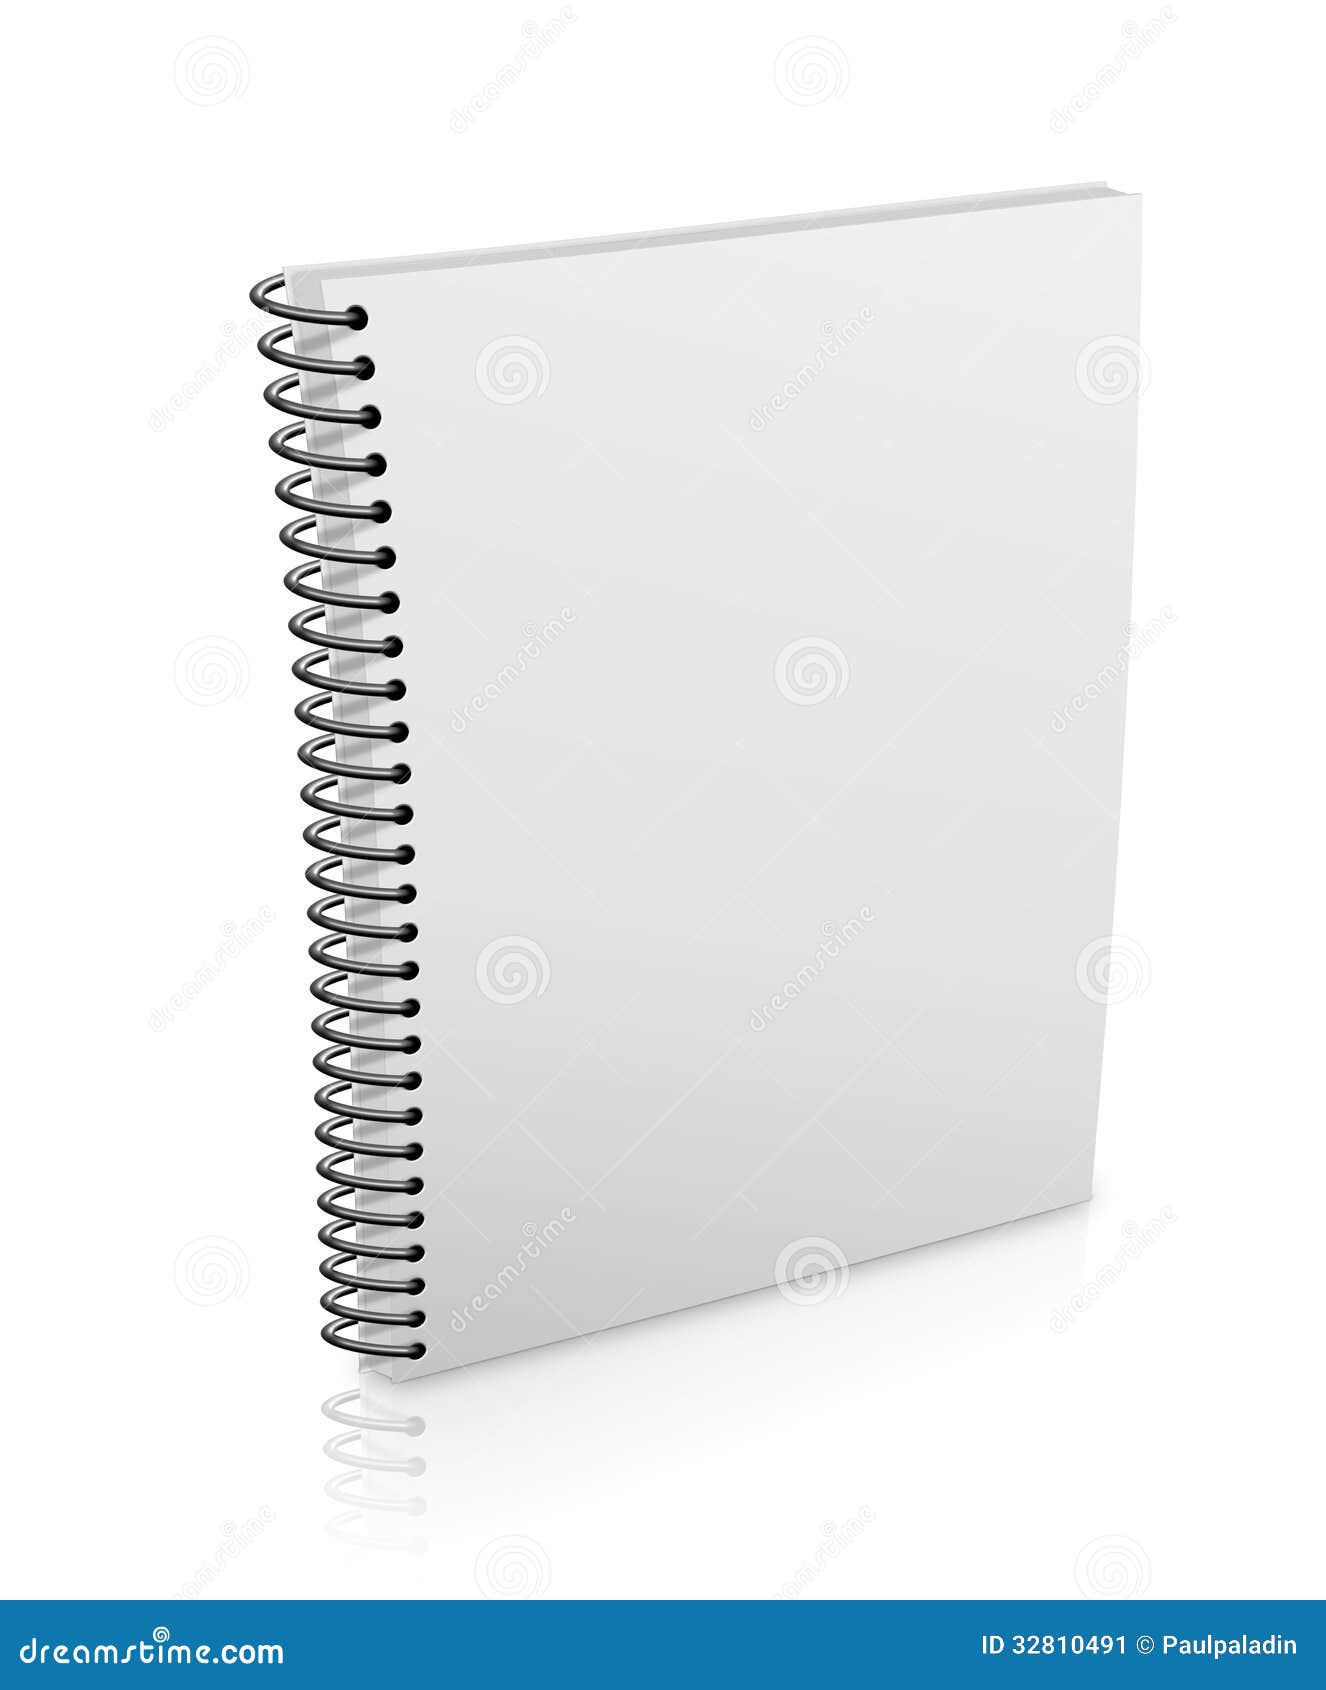 Spiral binder stock illustration. Image of lines, diary ...